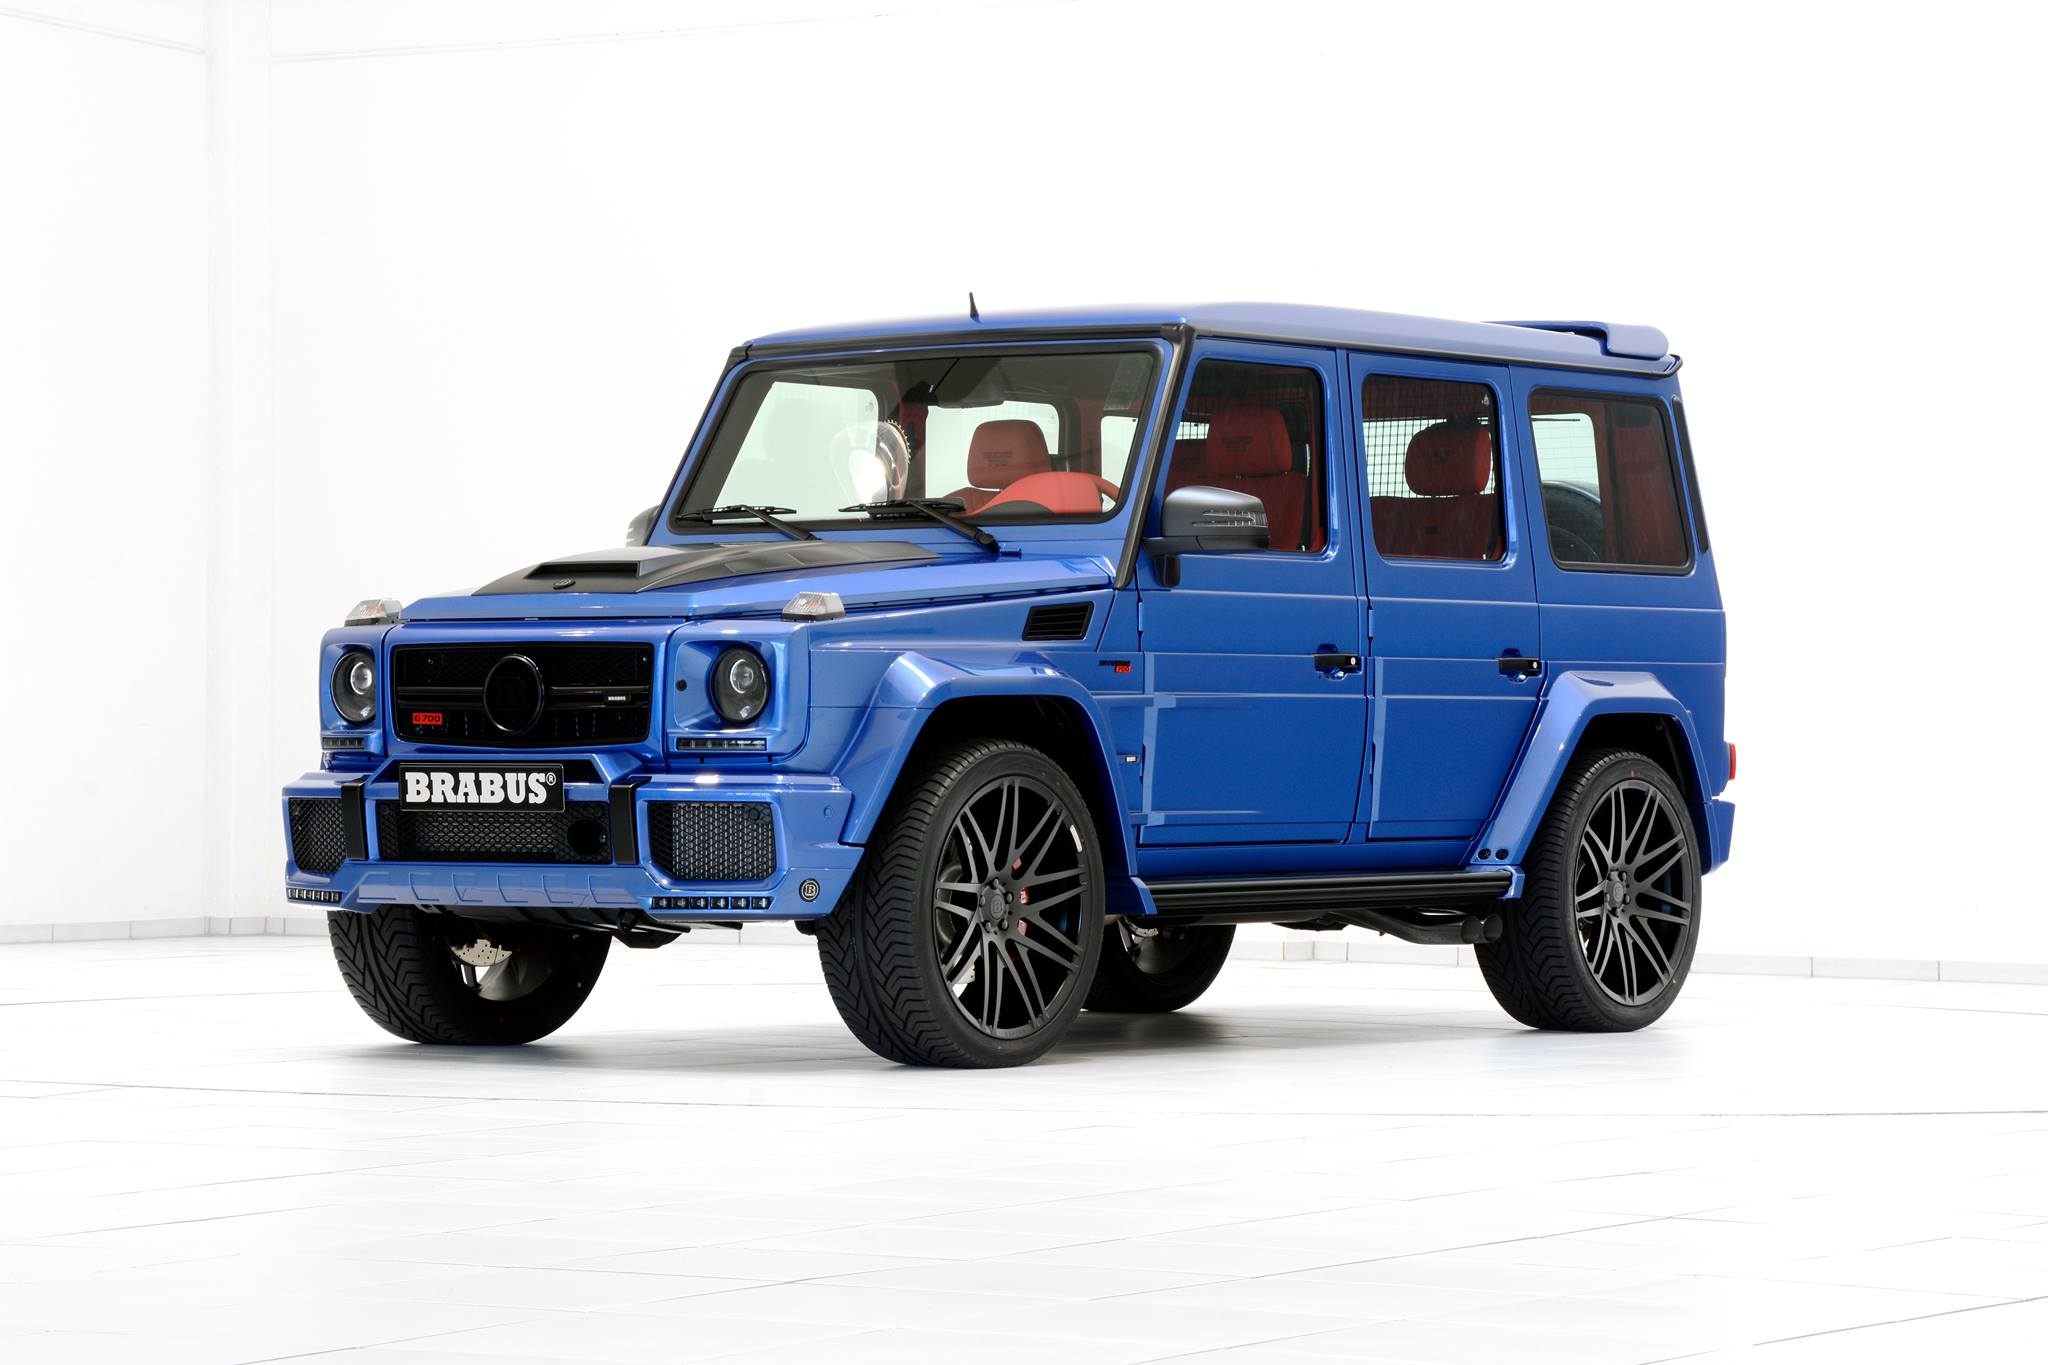 brabus-700-hp-g63-amg-combines-blue-paint-and-red-leather_1-autonovosti.me-1